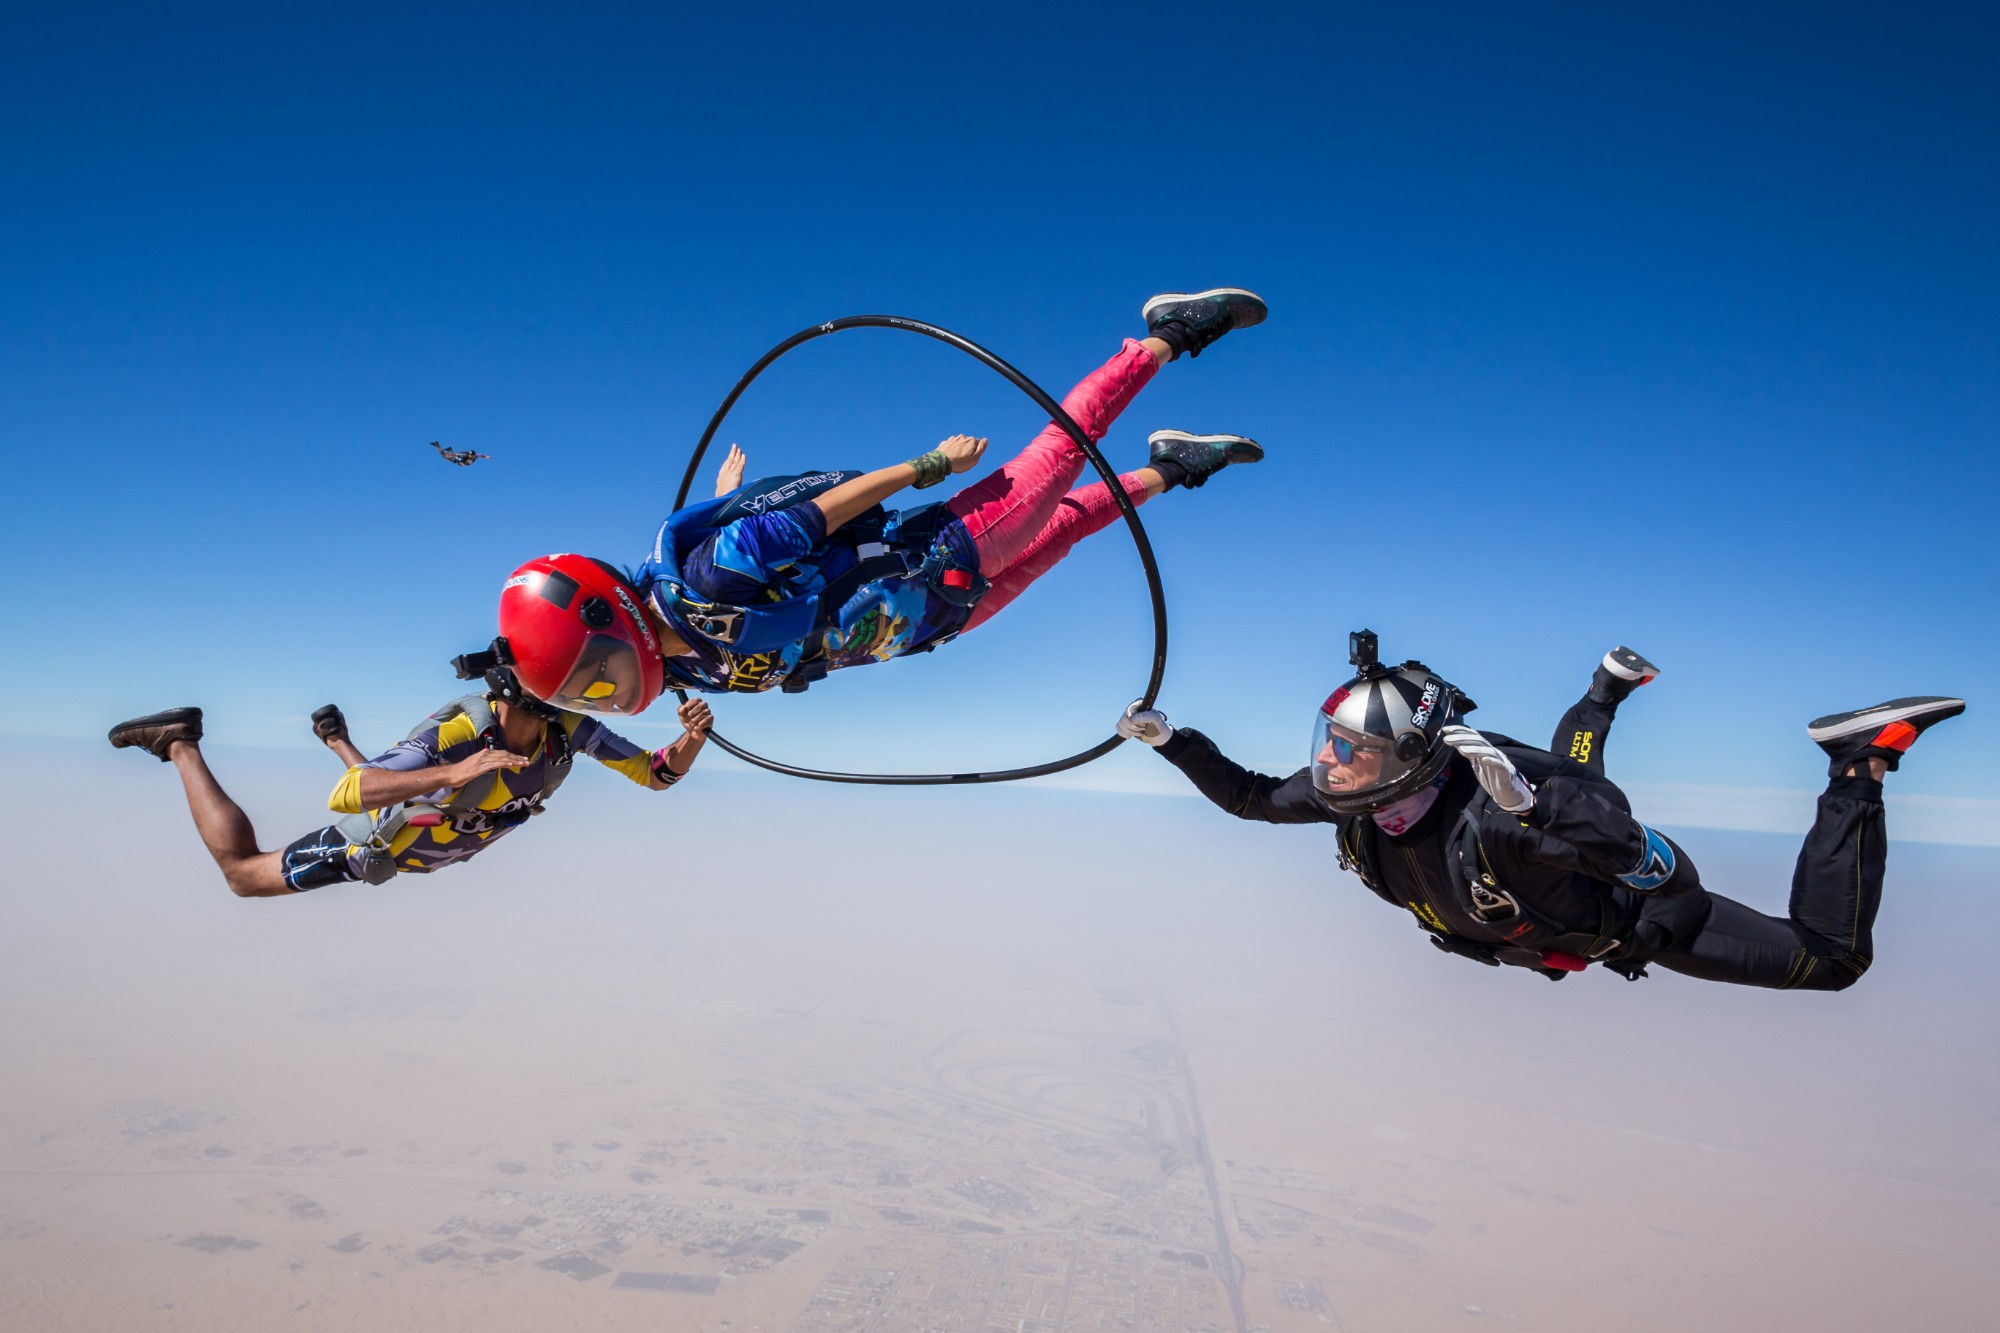 Watch The Harrowing Moment a Skydiver Having a Seizure Is Rescued in Midair